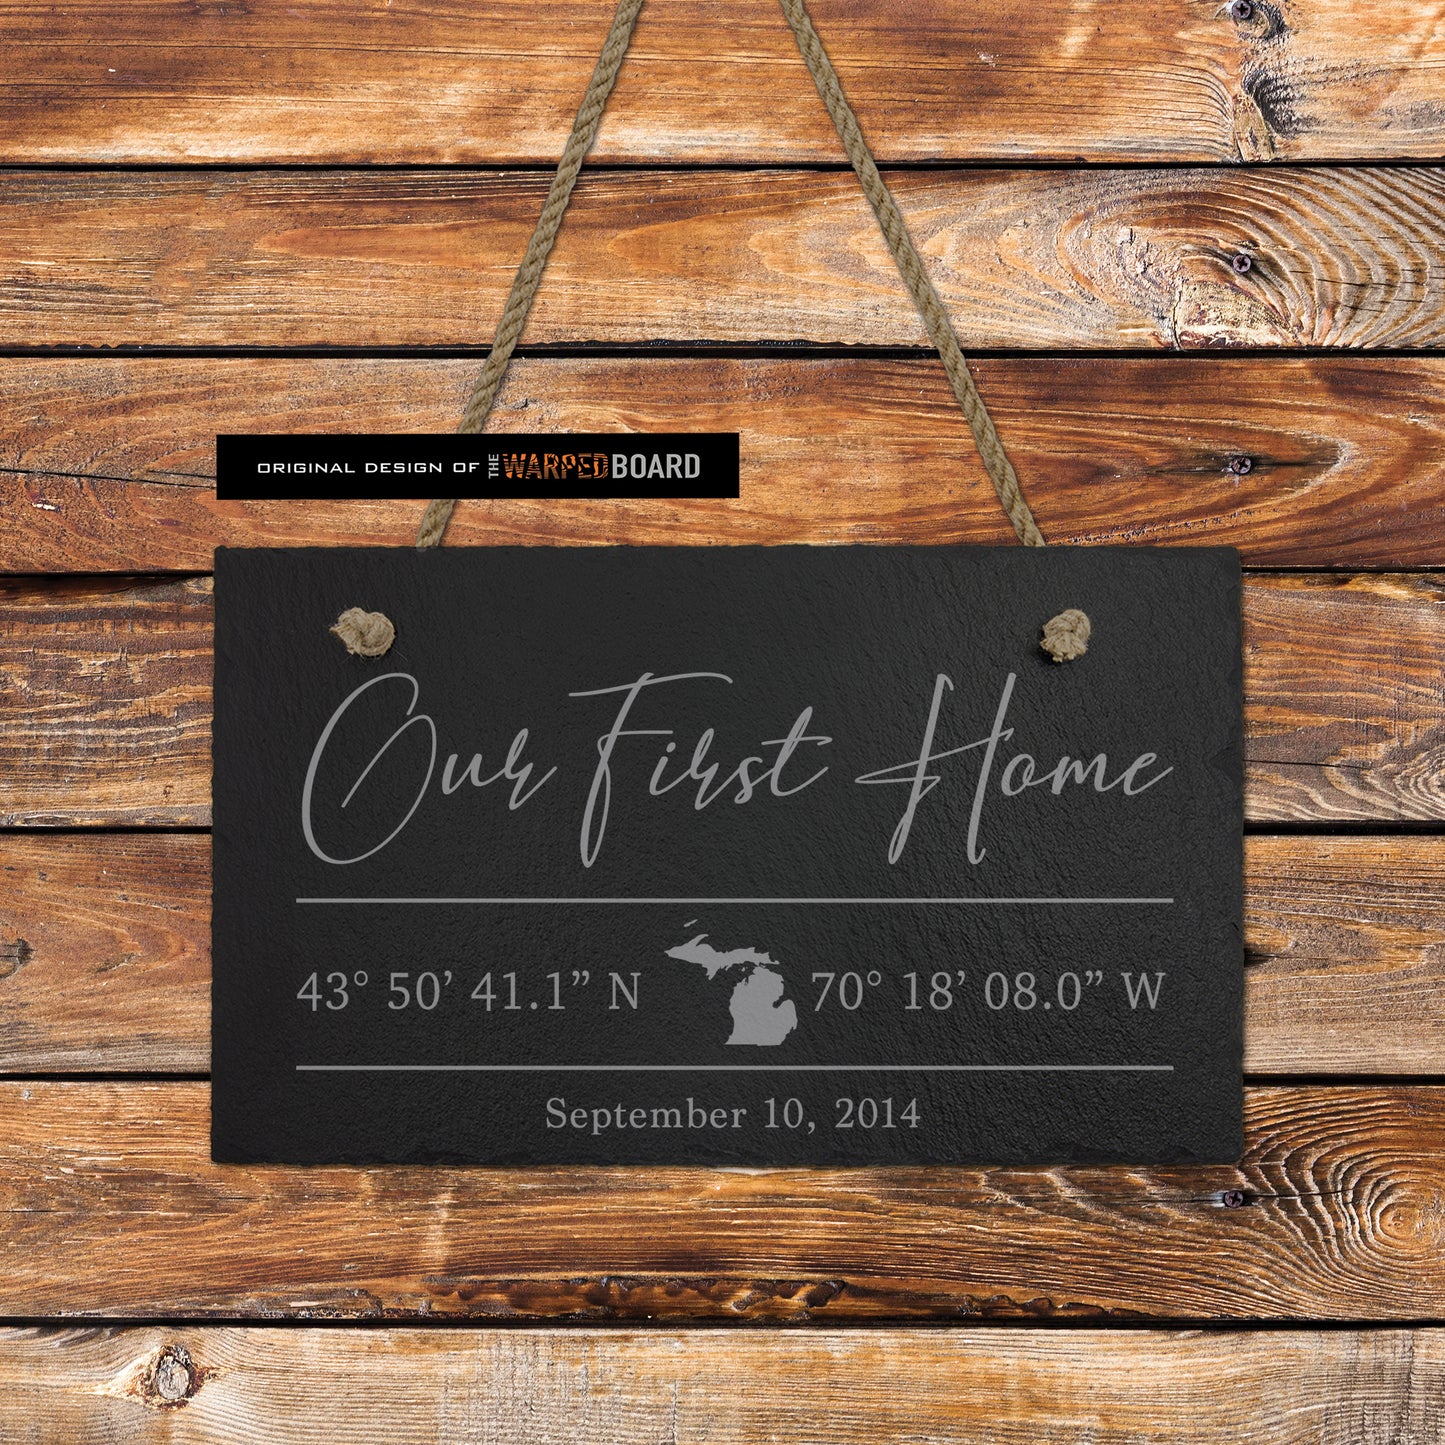 Our First Home with GPS Coordinates Engraved on Slate Tile